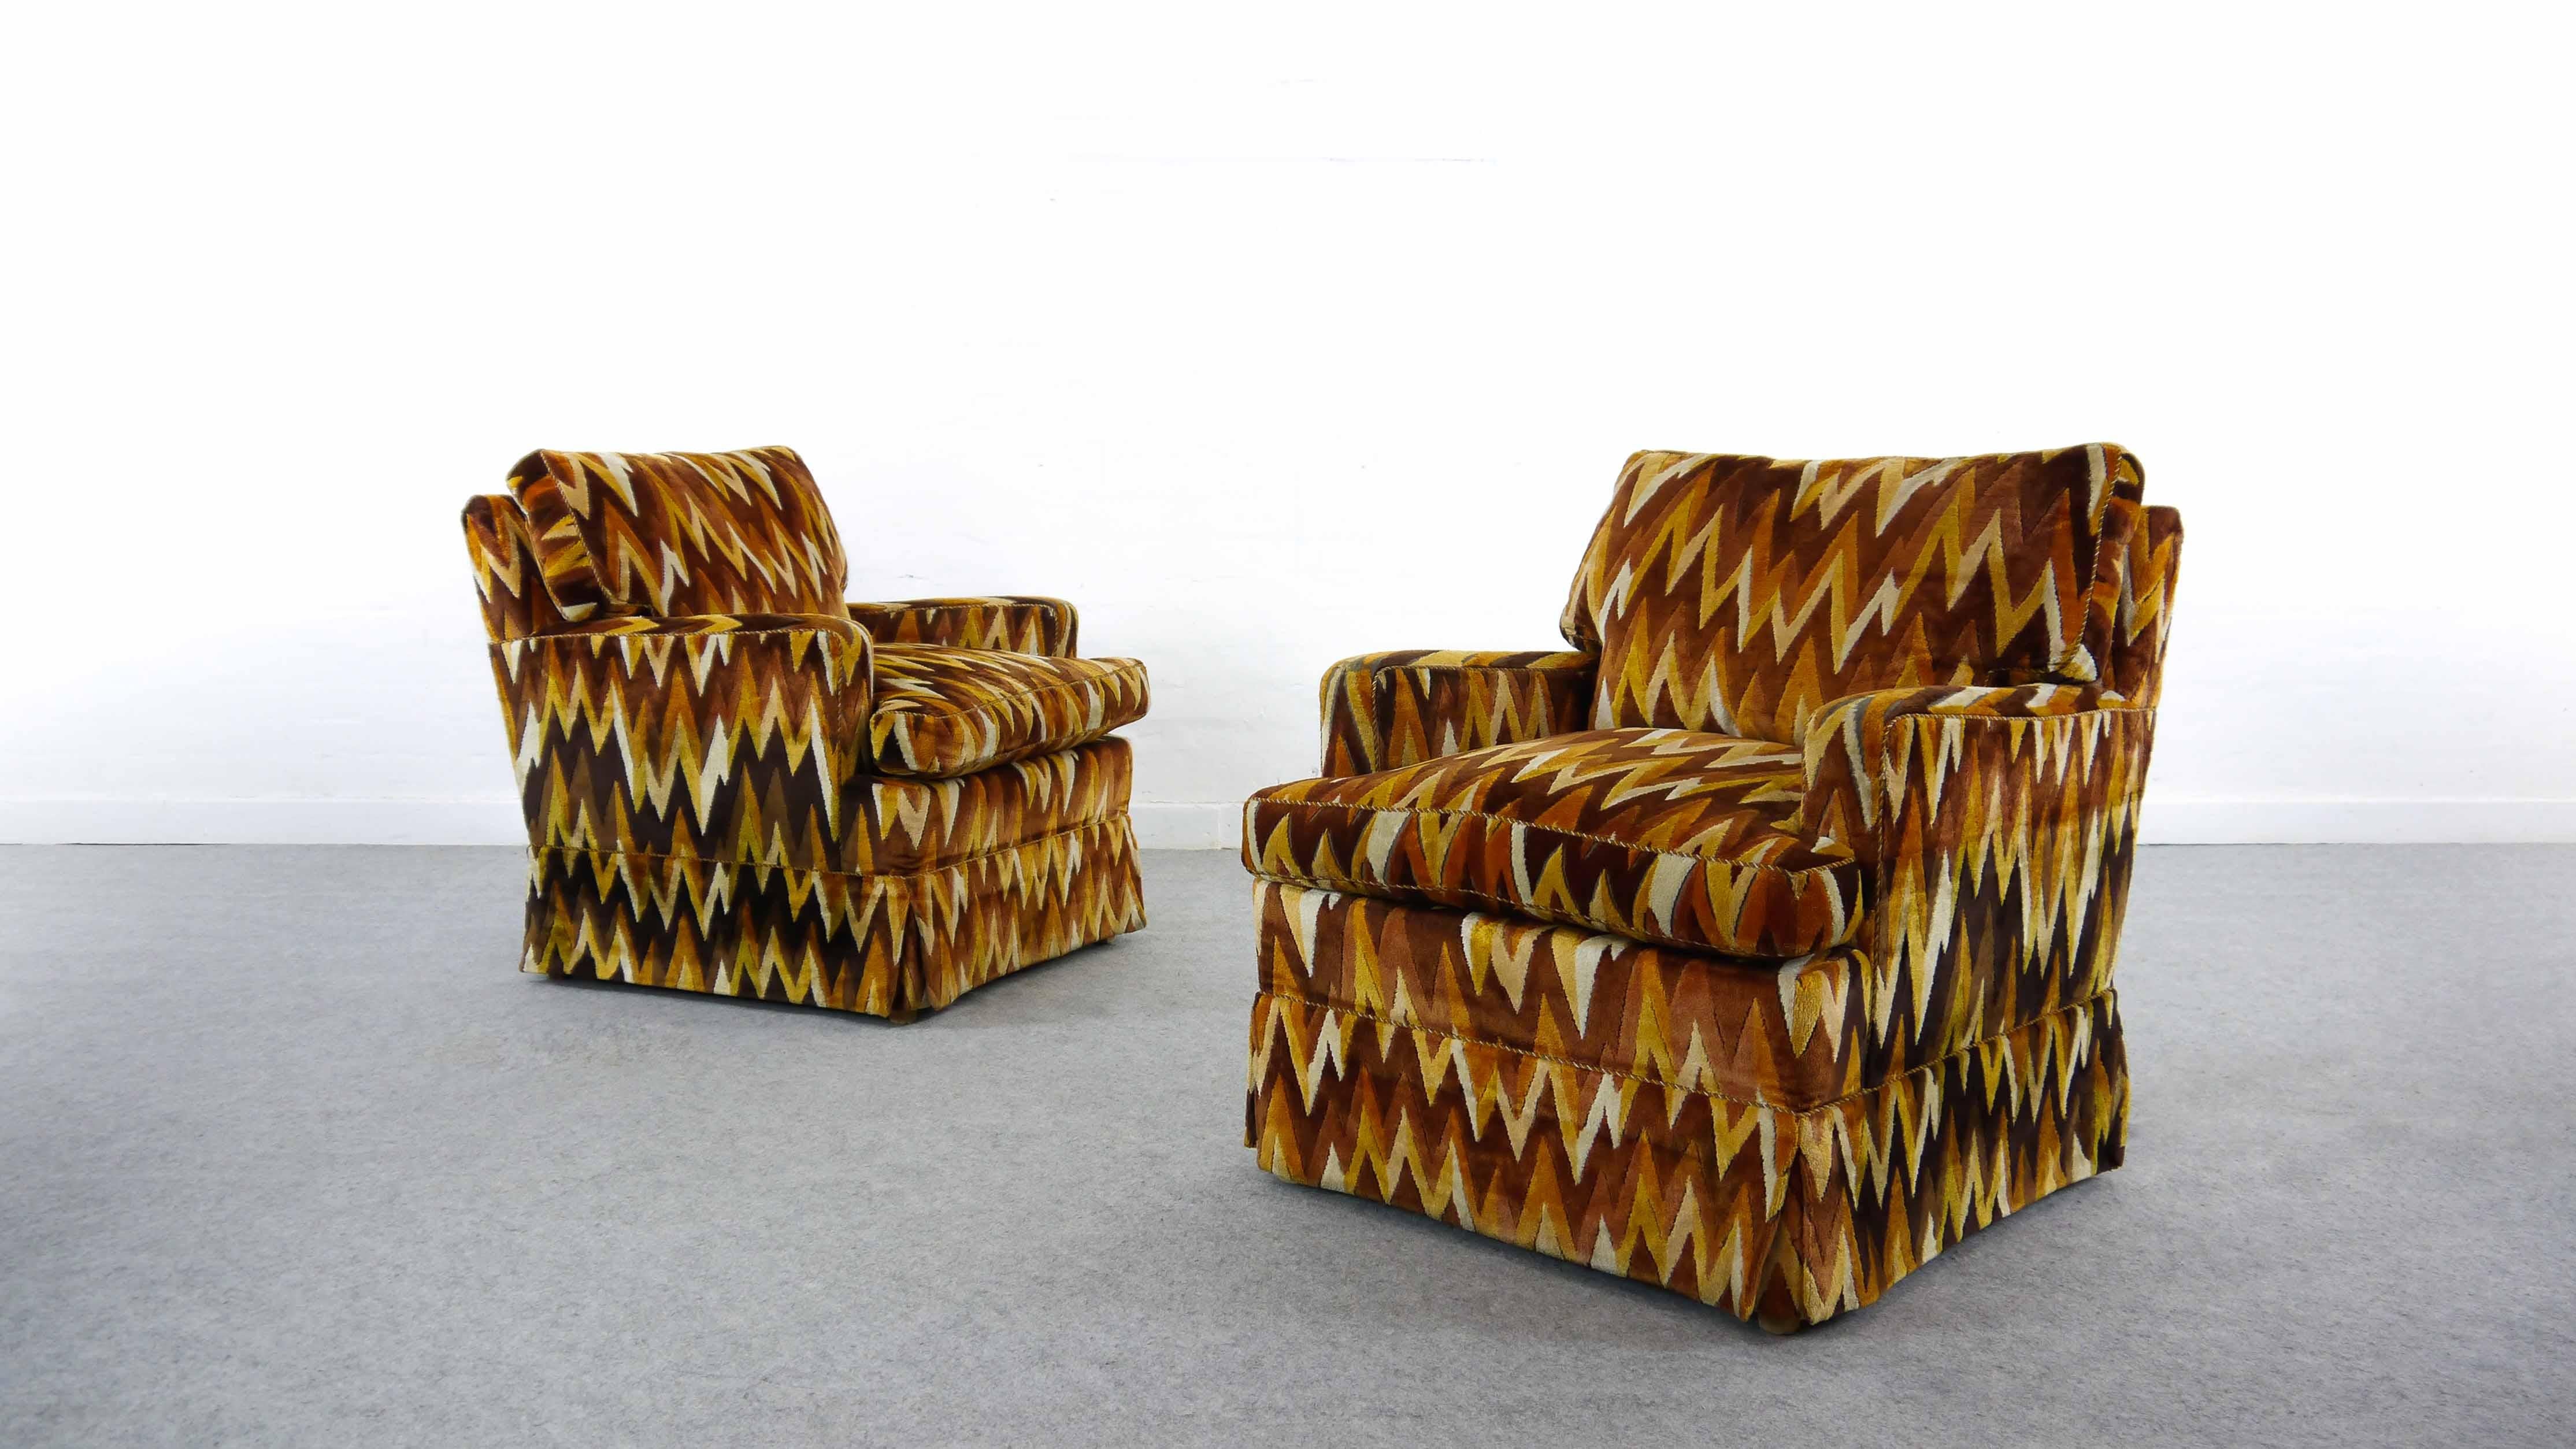 Set of 2 lounge chairs/ fireplace chairs from the 1970s. Swinging zigzag pattern in Missoni style. Original brown / yellow shades upholstery. Lose down filled cushions on seat and backrest. Manufactured by Bielefelder Werkstätten, Germany. Marked